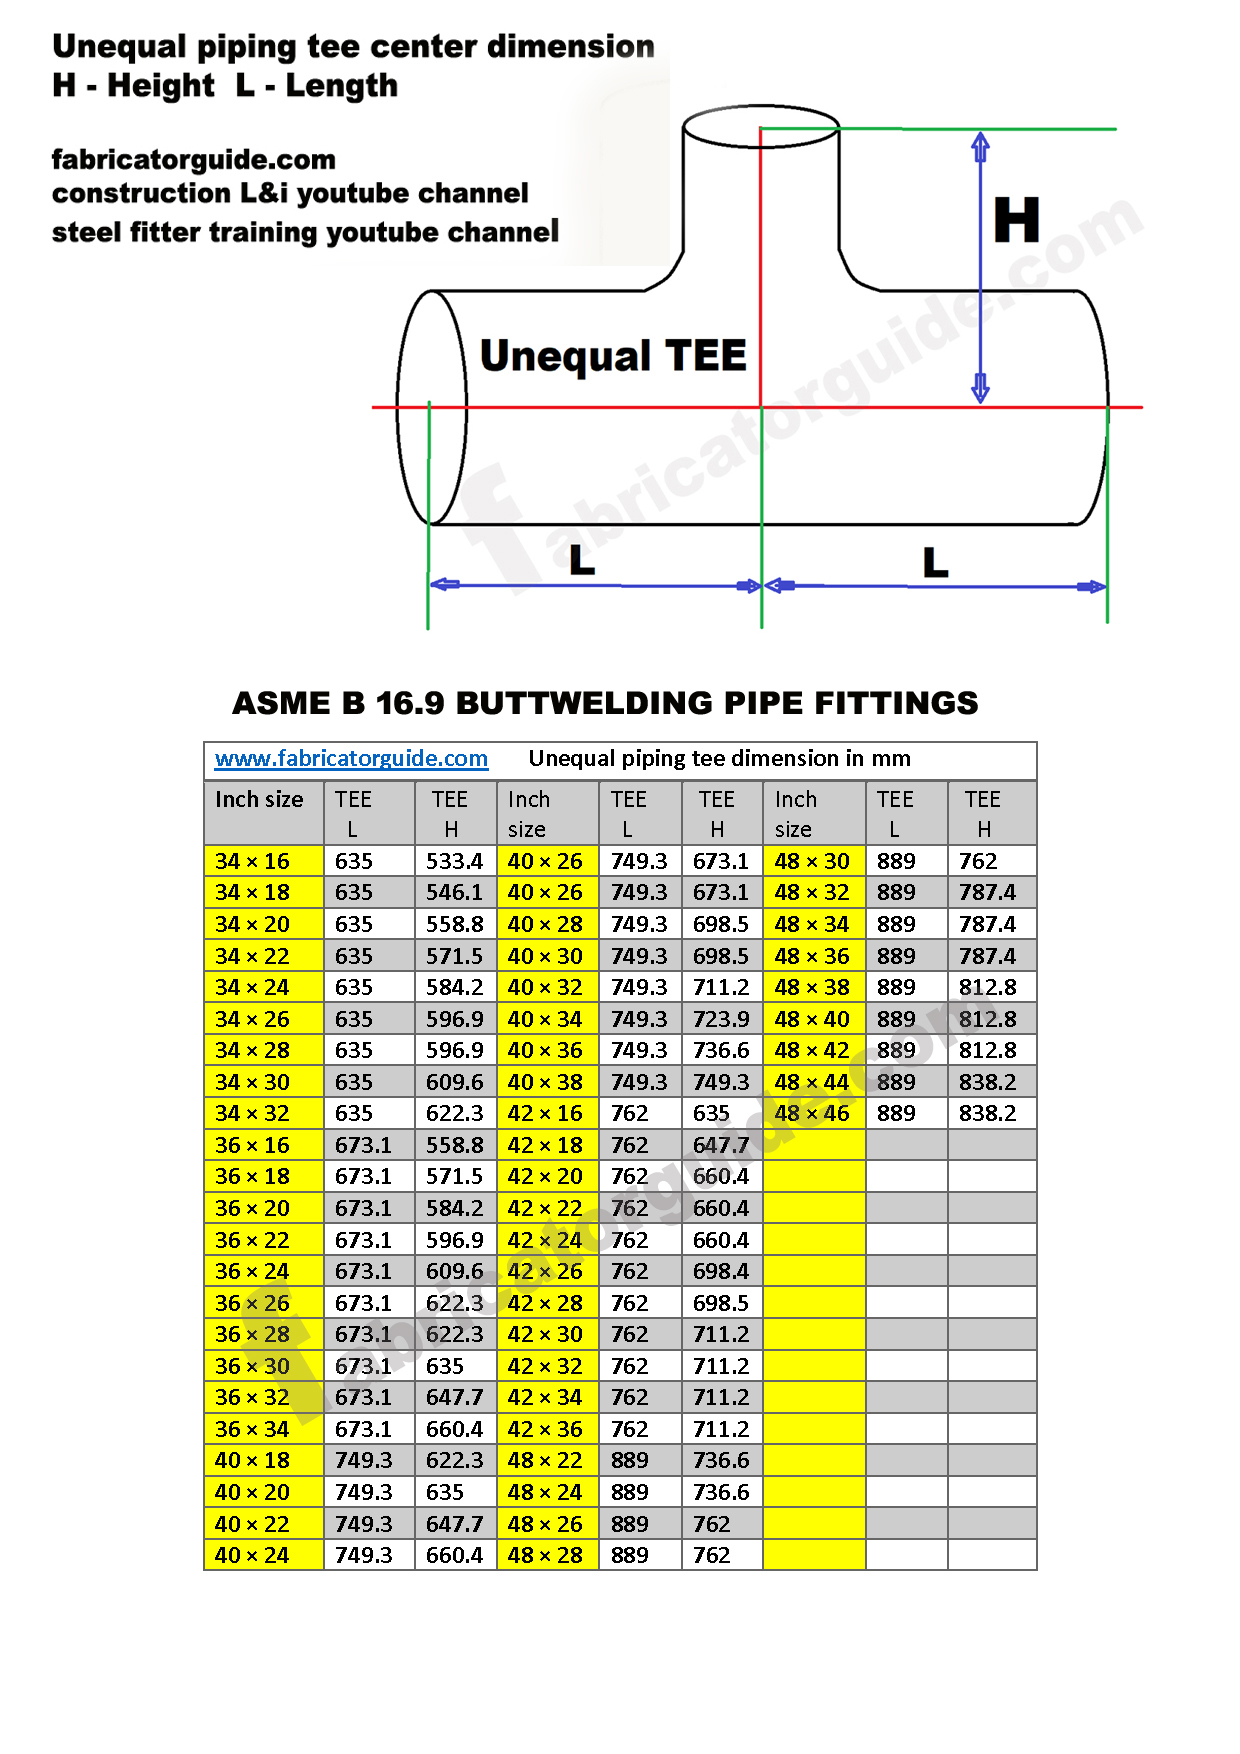 piping tee fittings dimension chart |Piping Equal Tee and unequal Tee dimention chart 